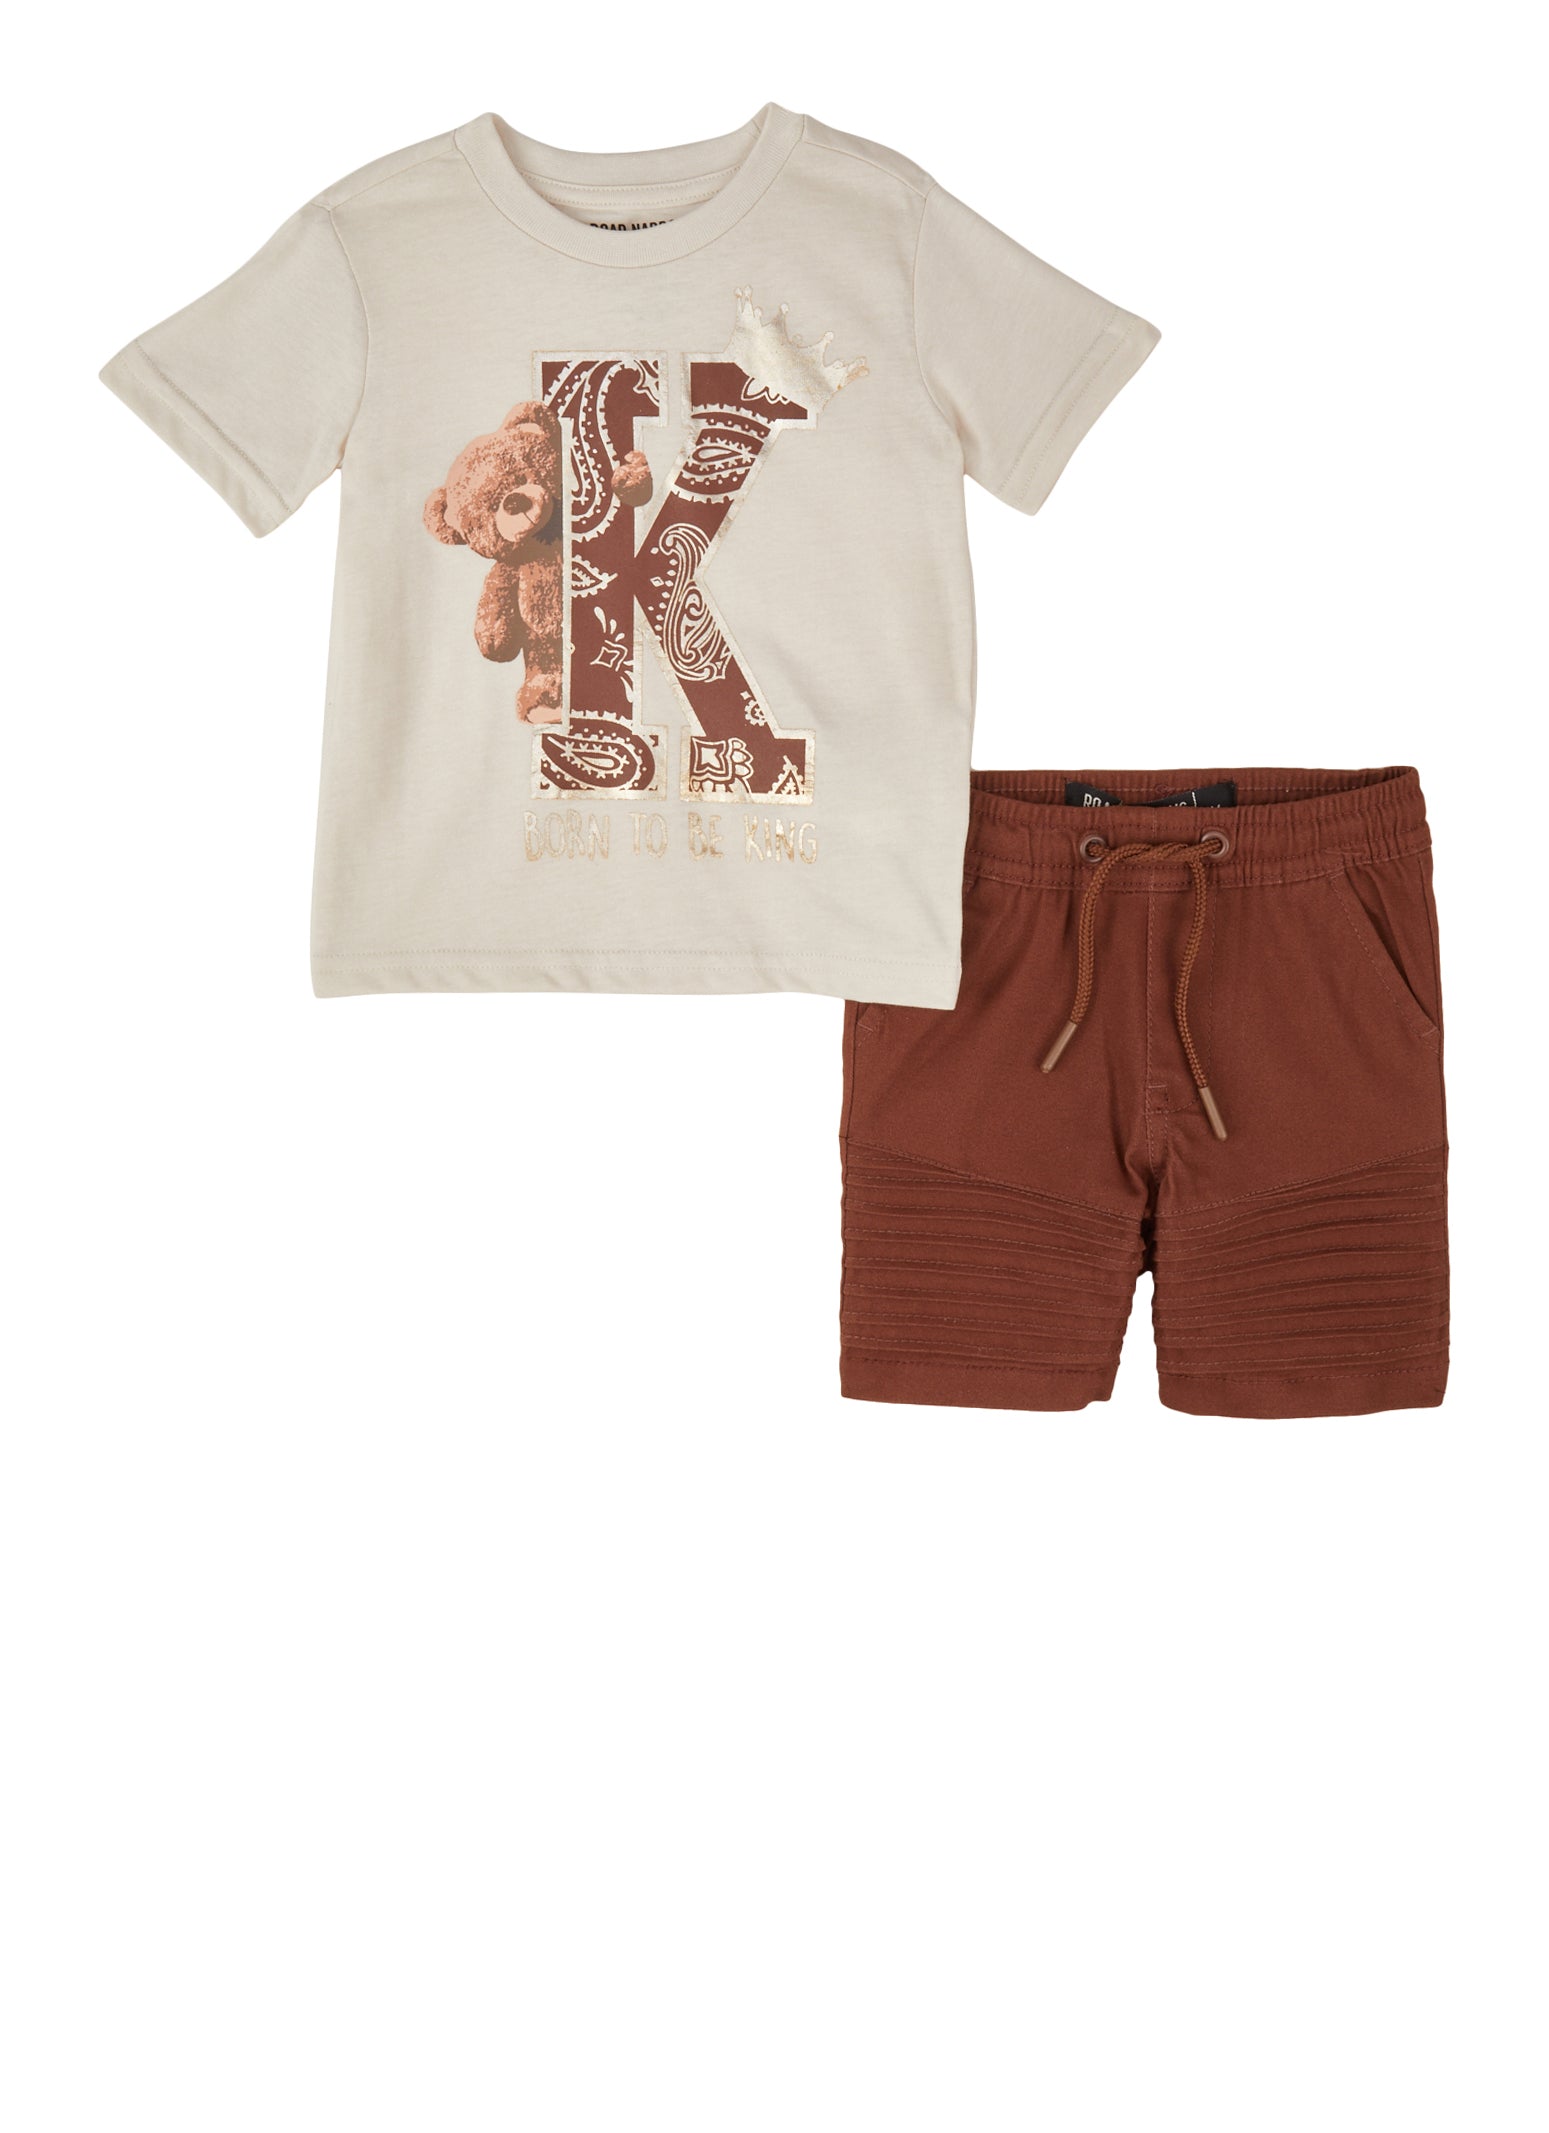 Baby Boys 12-24M Born To Be King Graphic Tee and Shorts, Brown, Size 18M